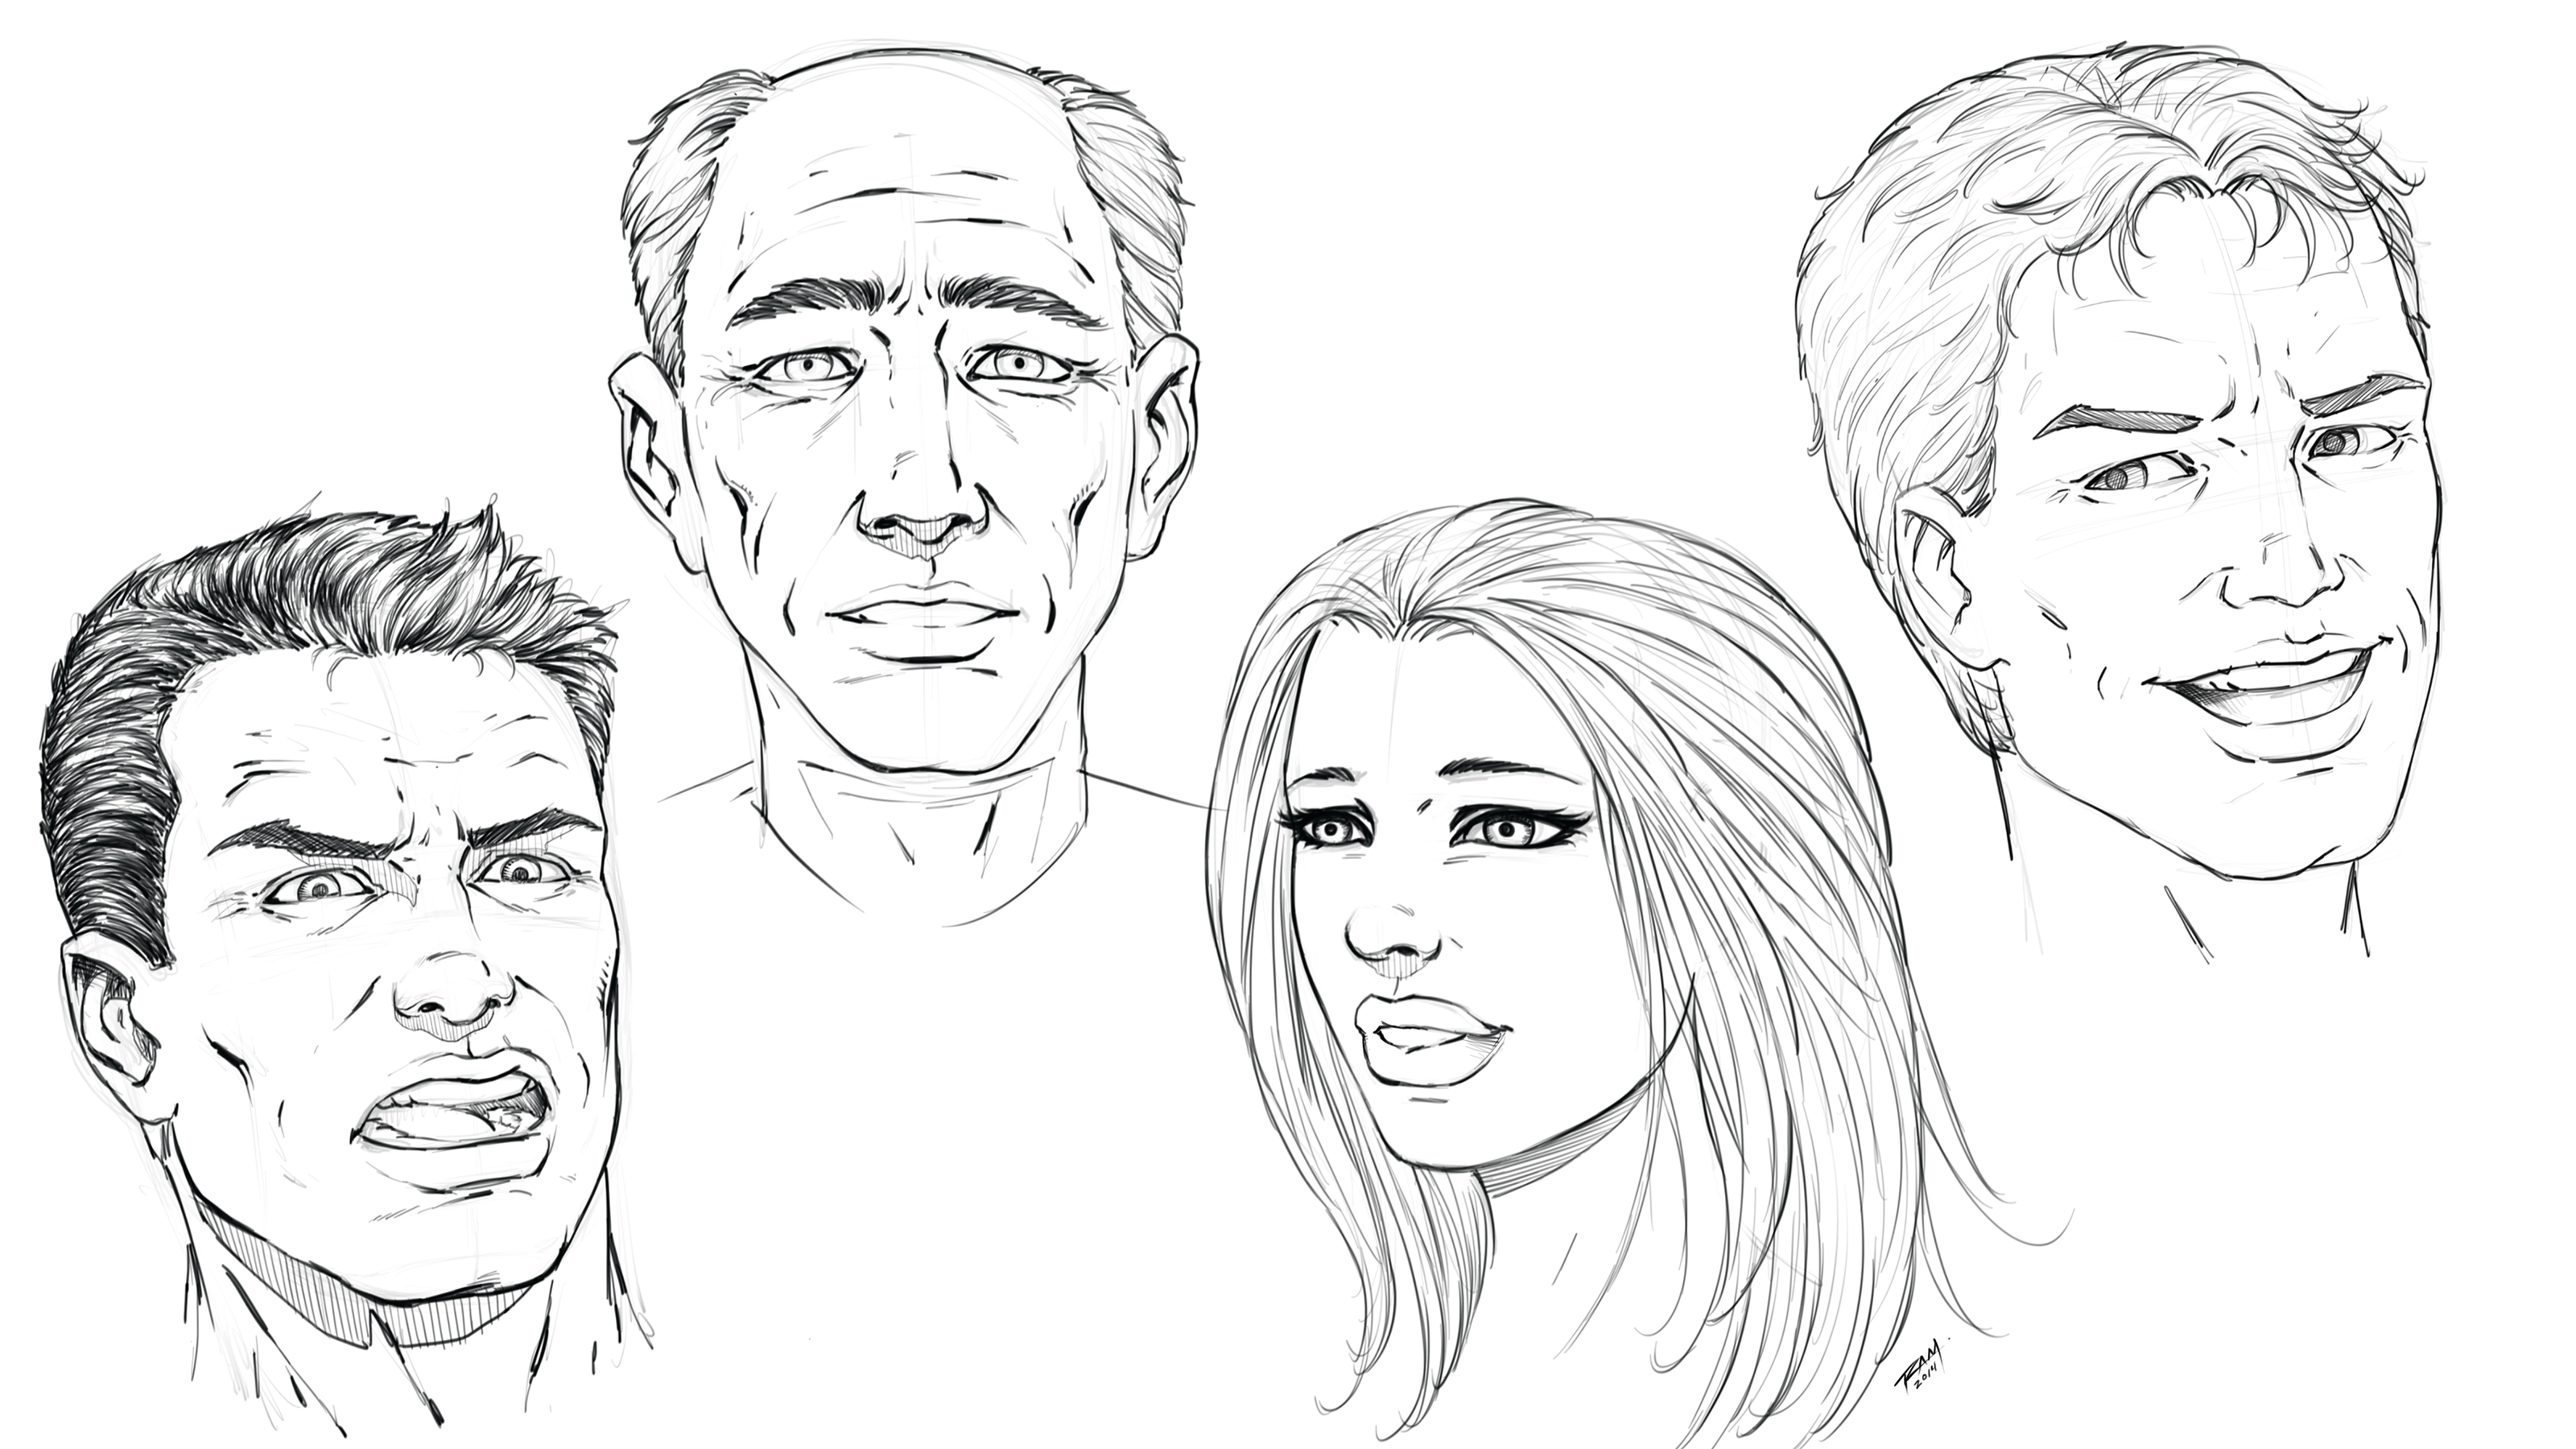 Drawing Comic Style Faces Using Traditional Art Supplies, Robert Marzullo